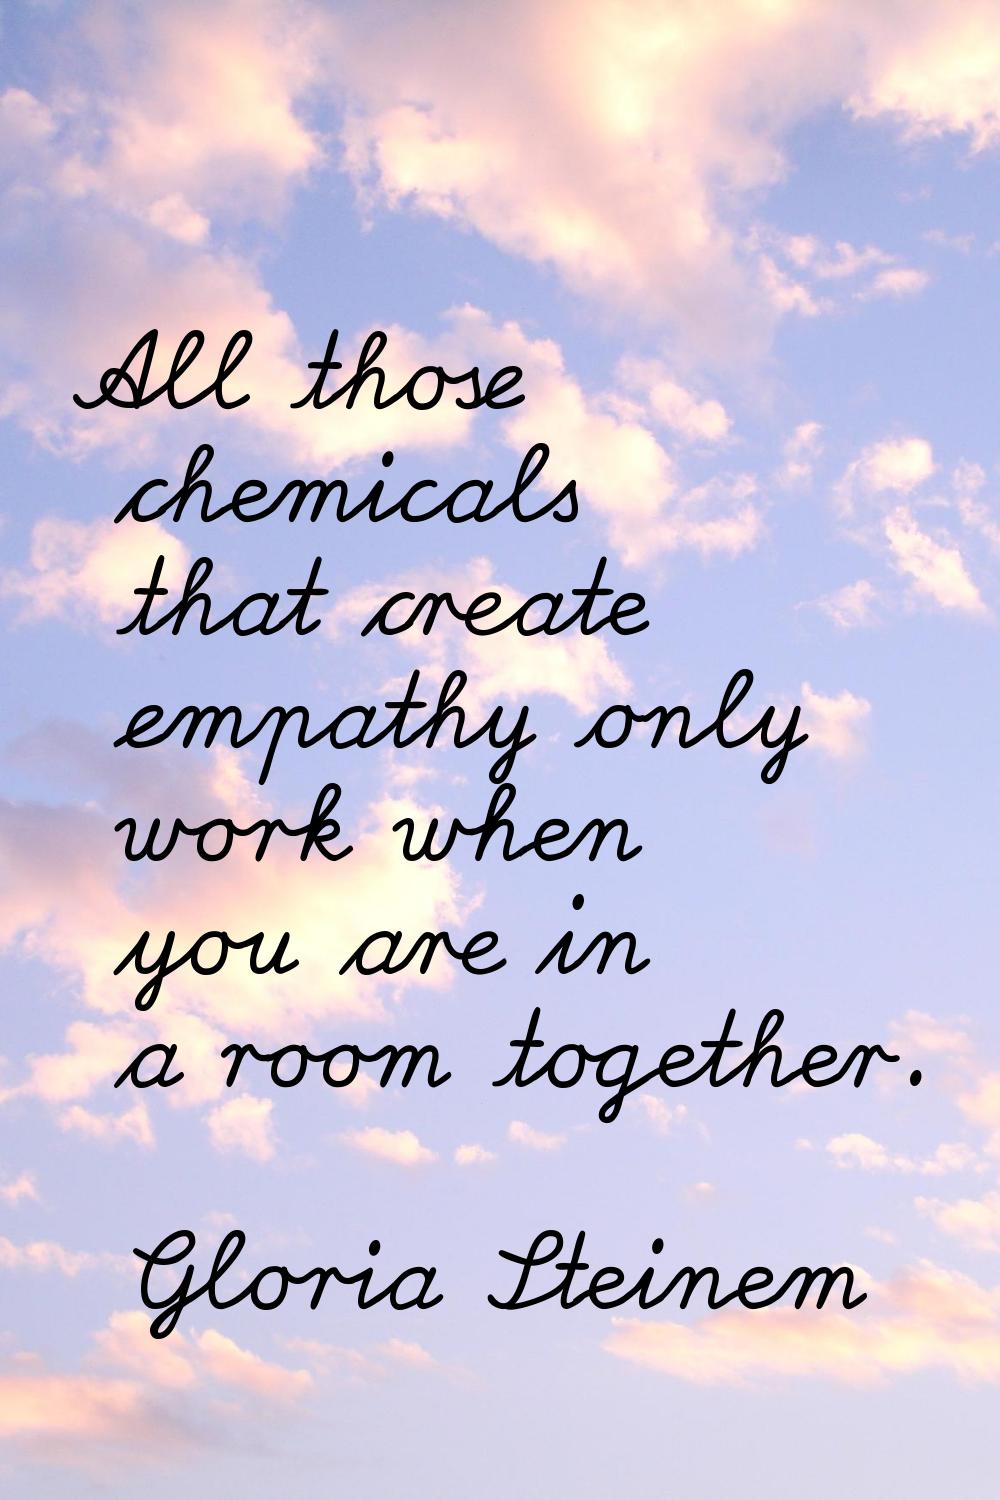 All those chemicals that create empathy only work when you are in a room together.